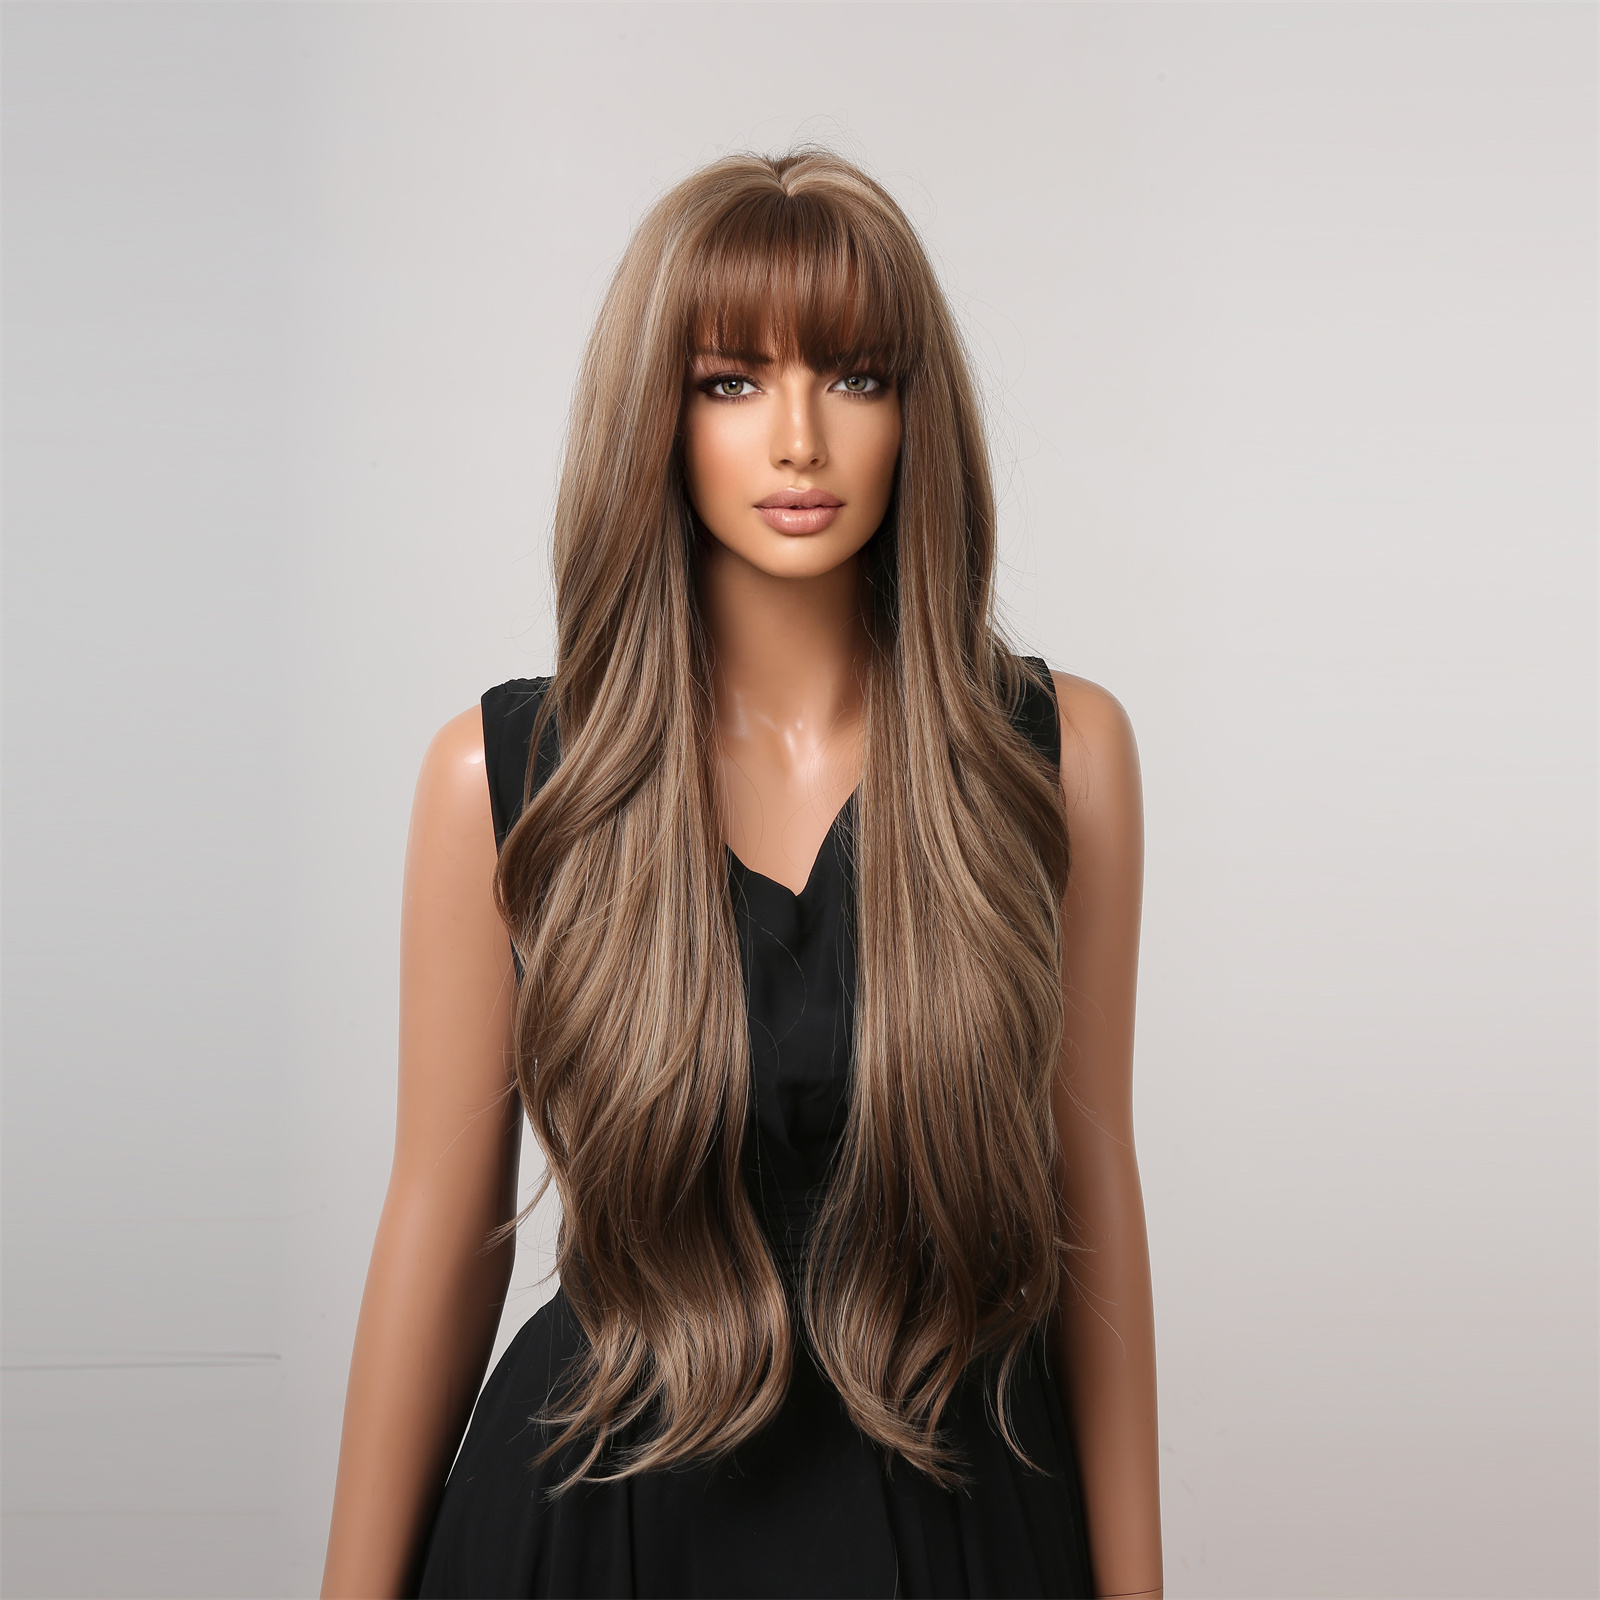 A stylish synthetic wig featuring dark brown long curly hair with bangs, designed for an effortless and fashionable look